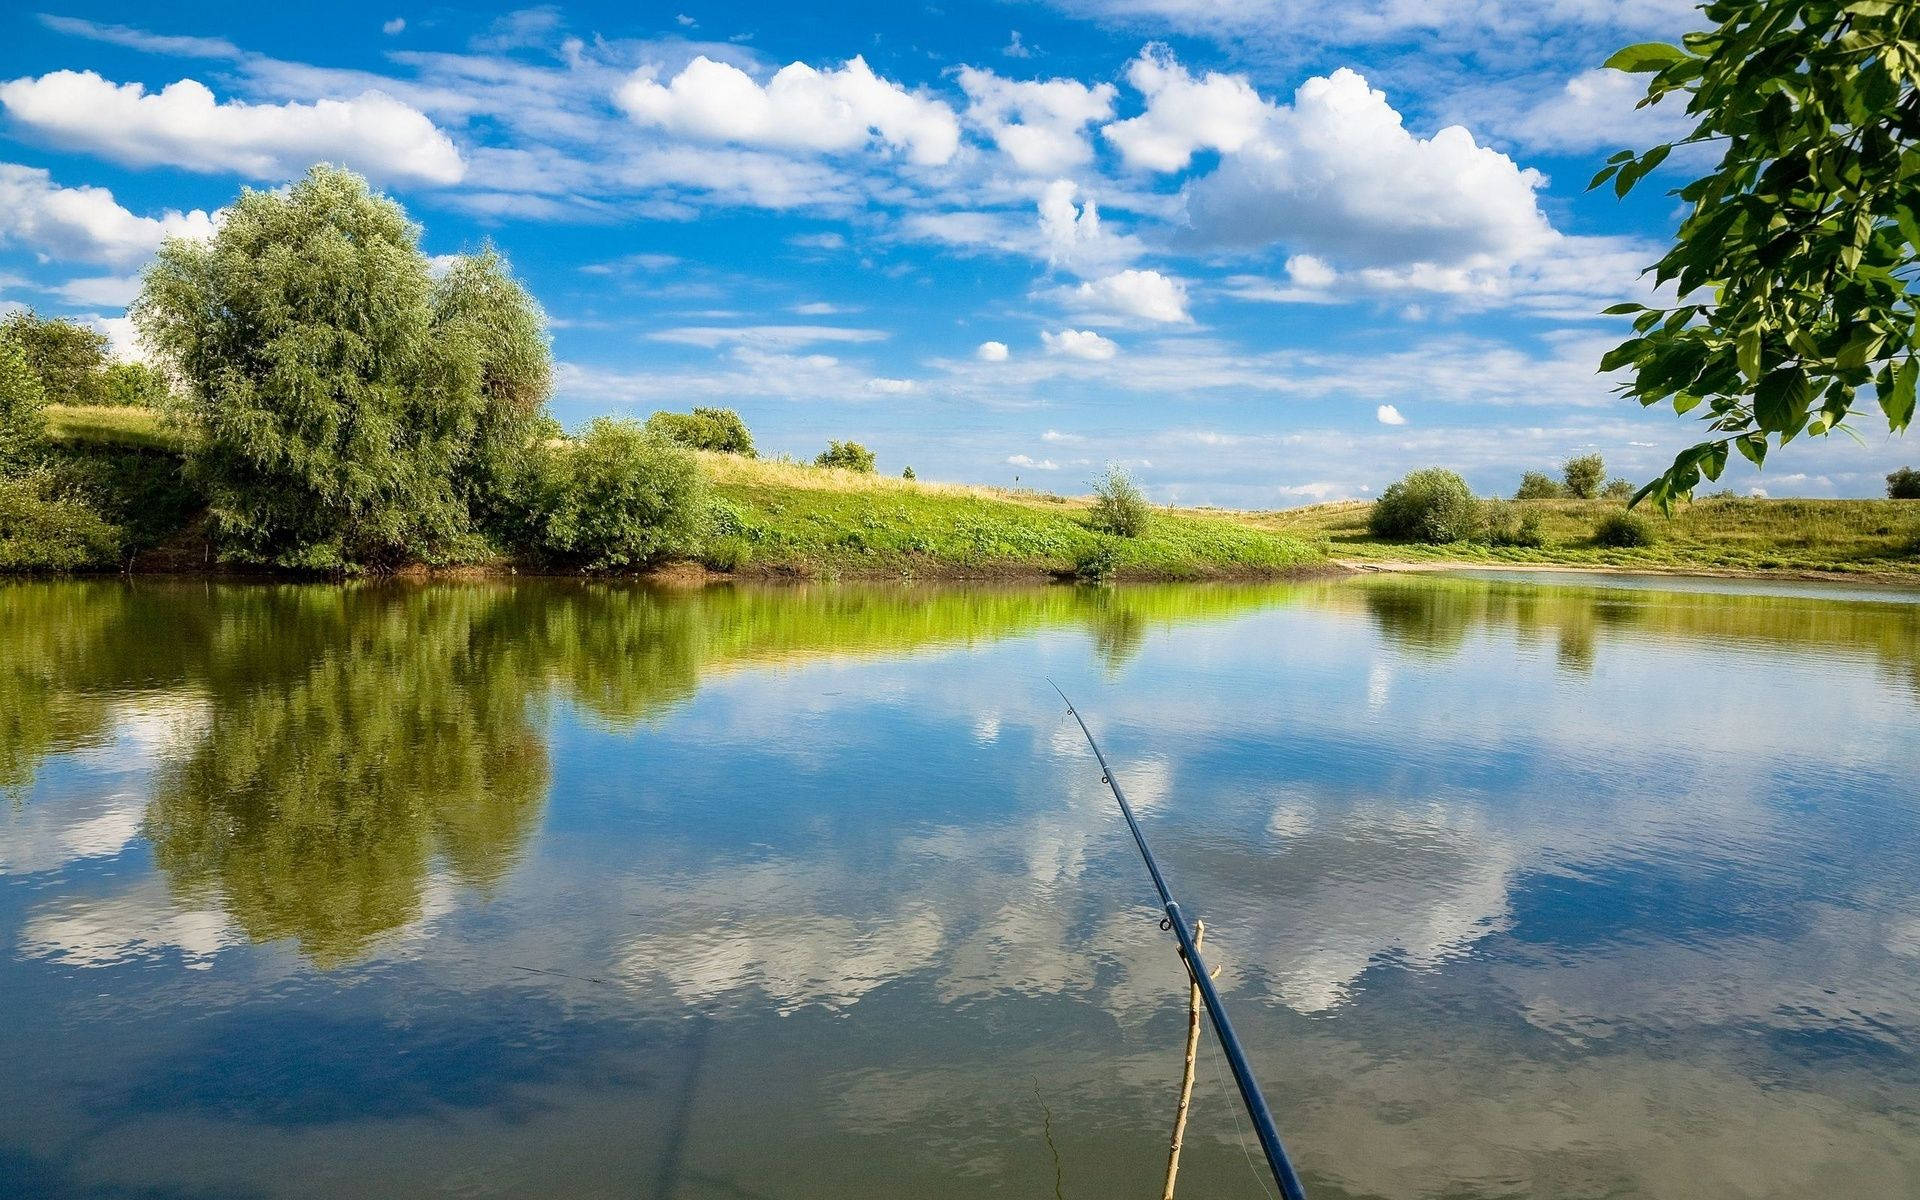 Enjoying Peace And Serenity At A Lake With A Fishing Rod Background